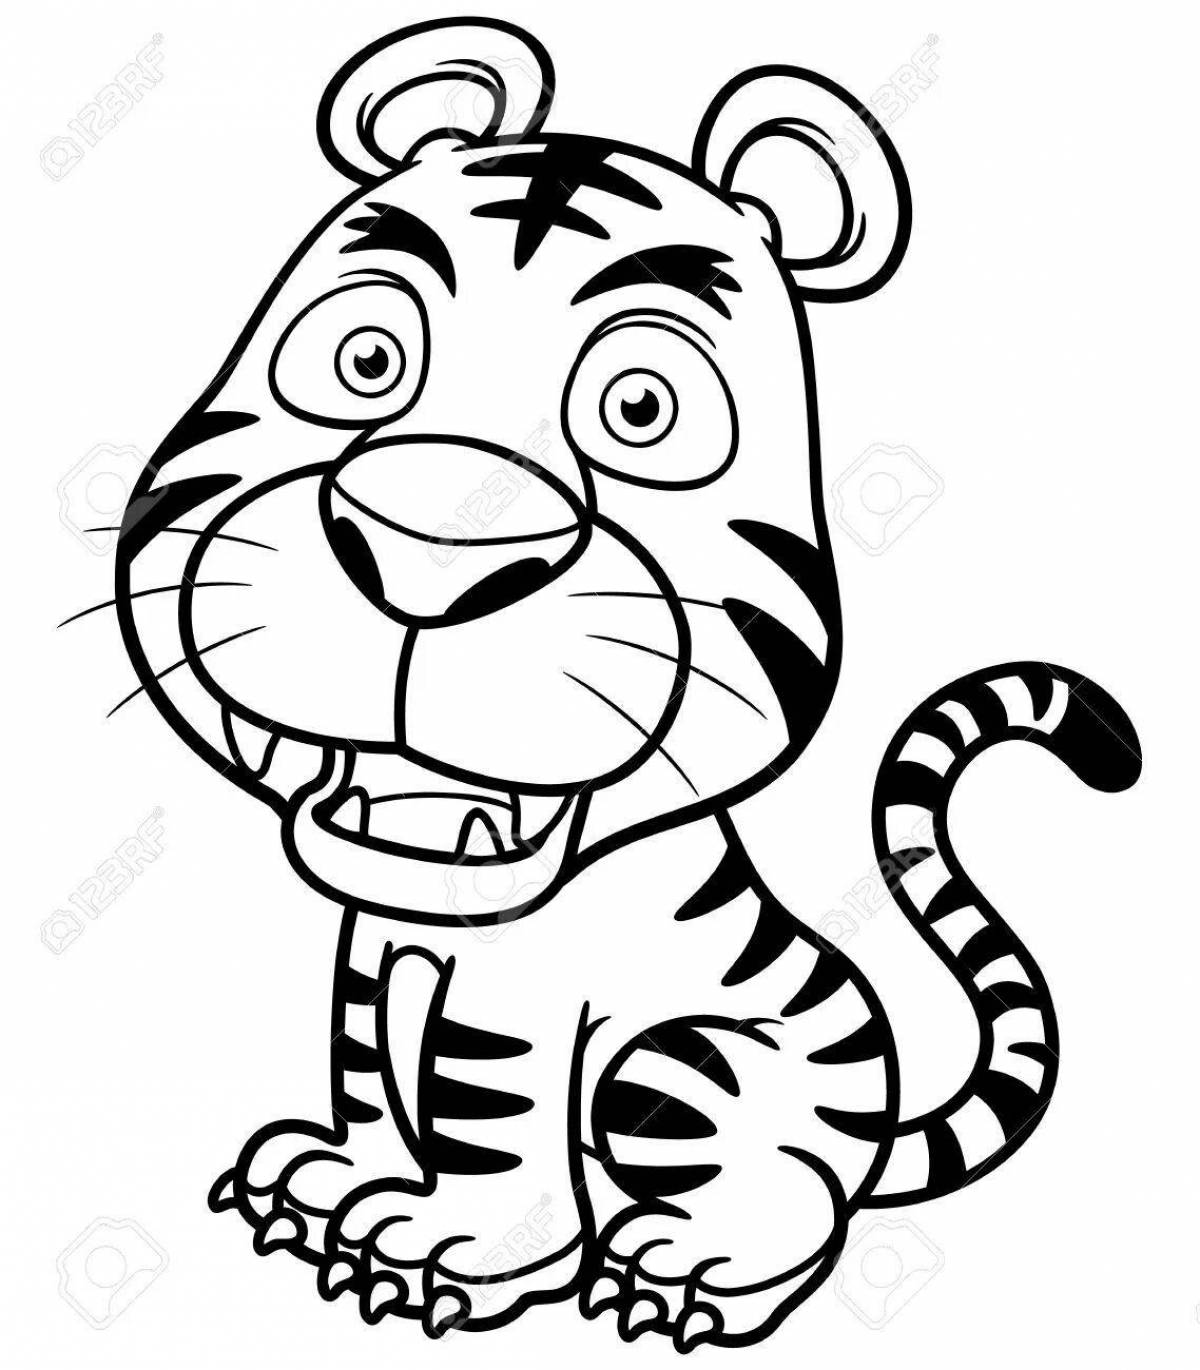 Amazing tiger and leo coloring pages for kids